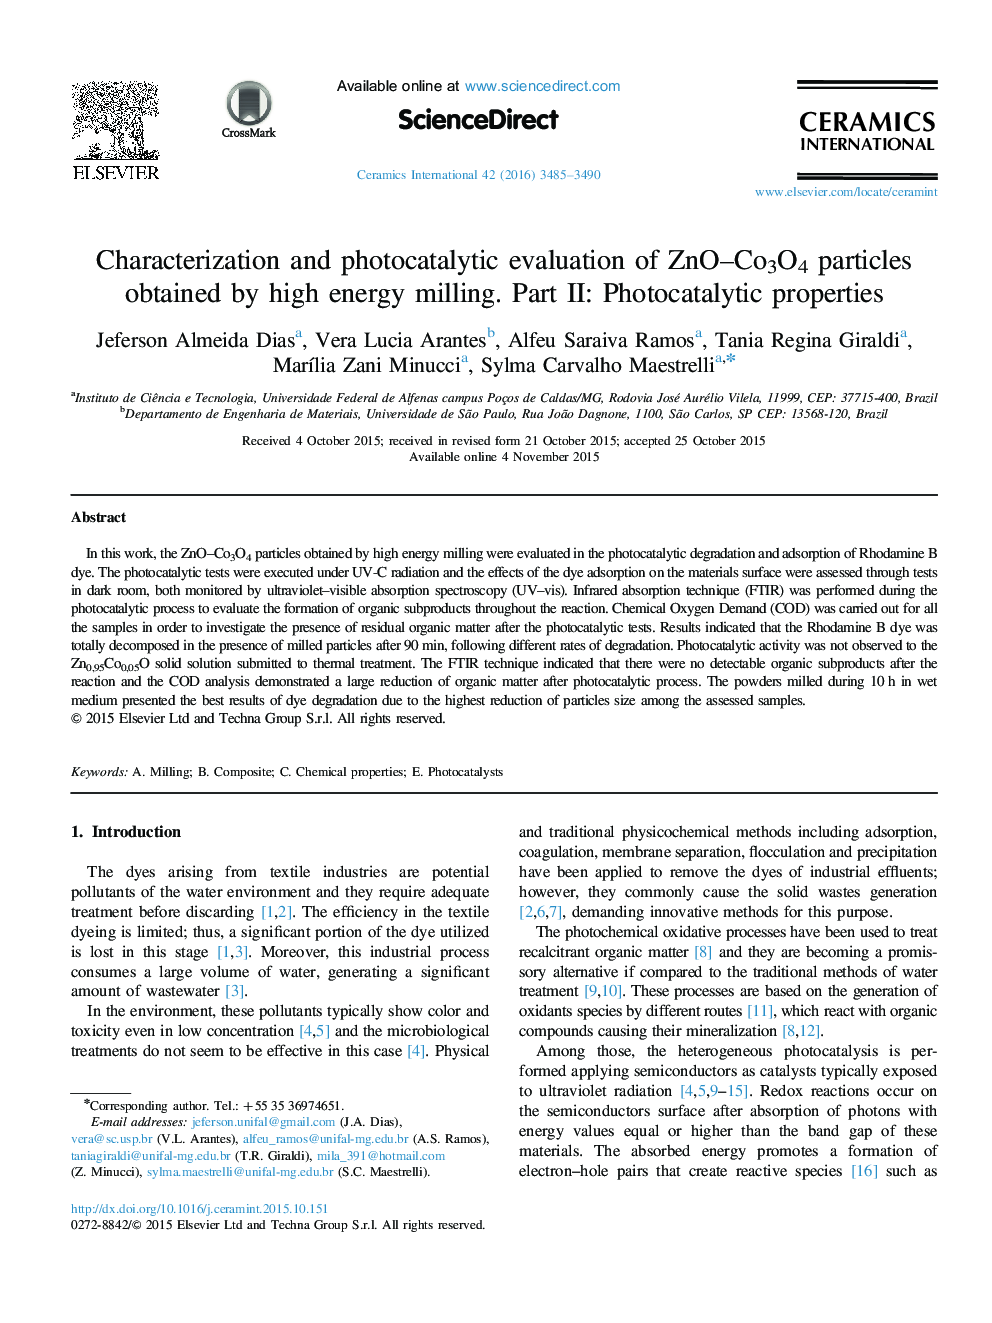 Characterization and photocatalytic evaluation of ZnO–Co3O4 particles obtained by high energy milling. Part II: Photocatalytic properties